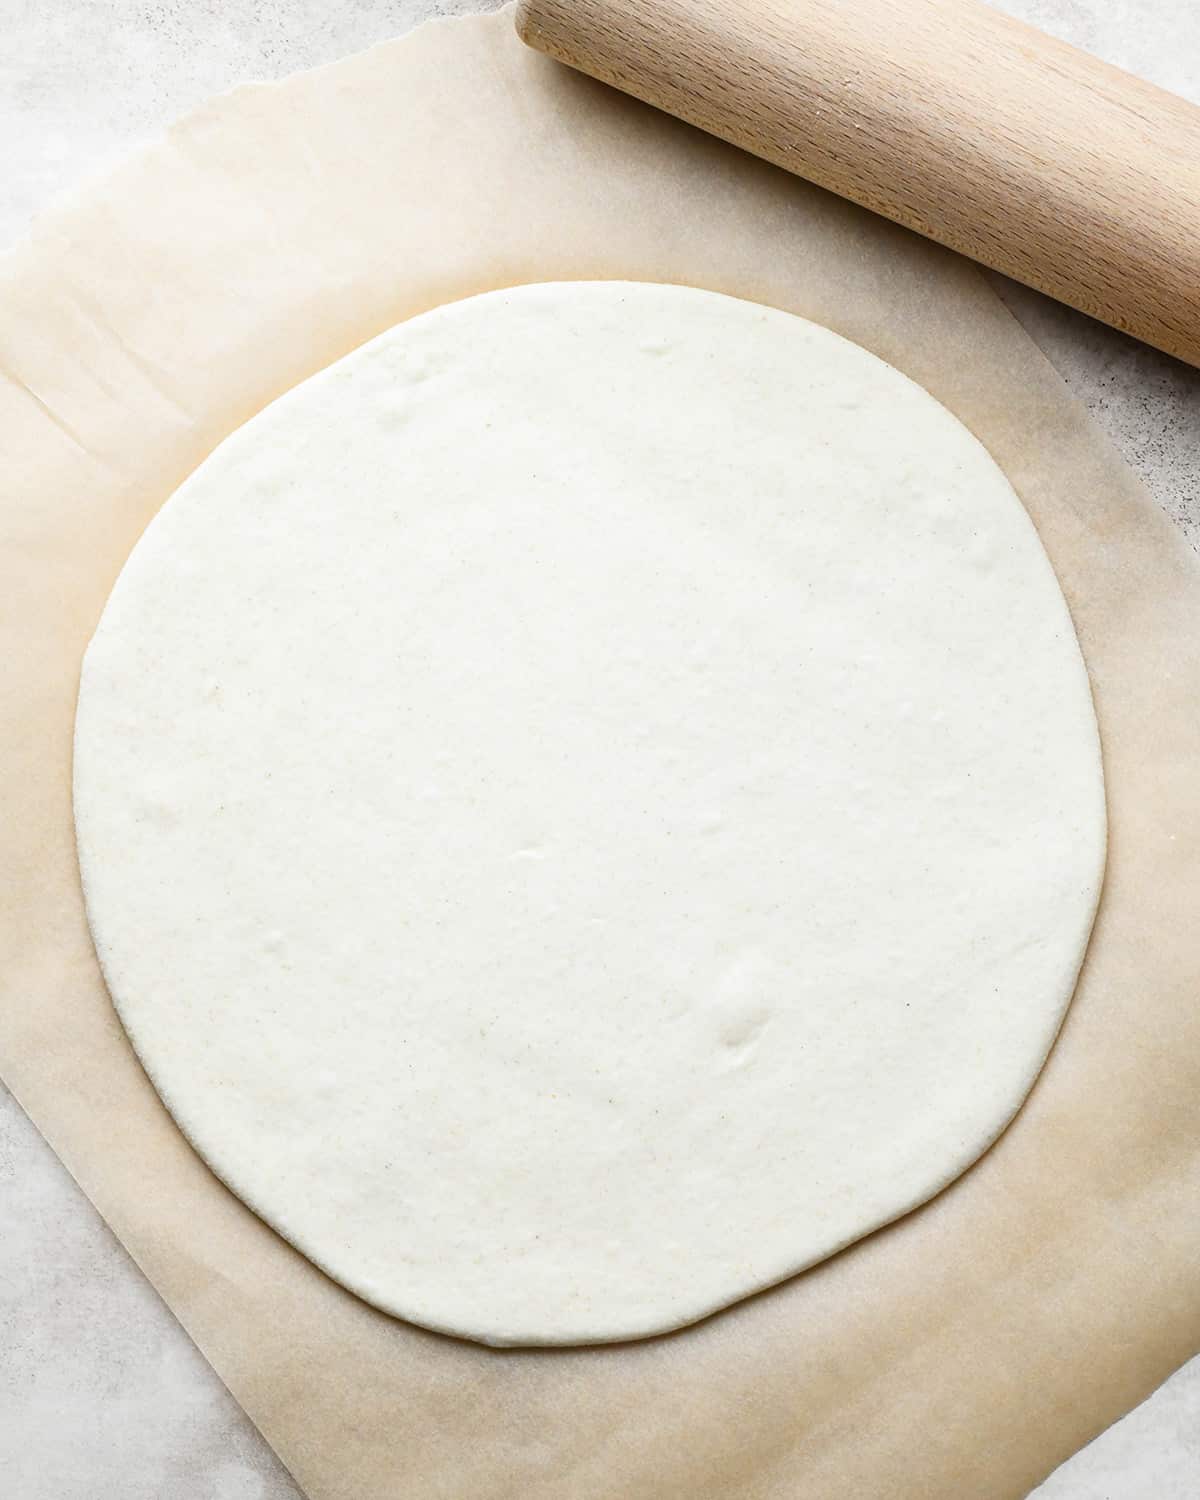 How to Make Pepperoni Pizza - pizza dough rolled into a circle